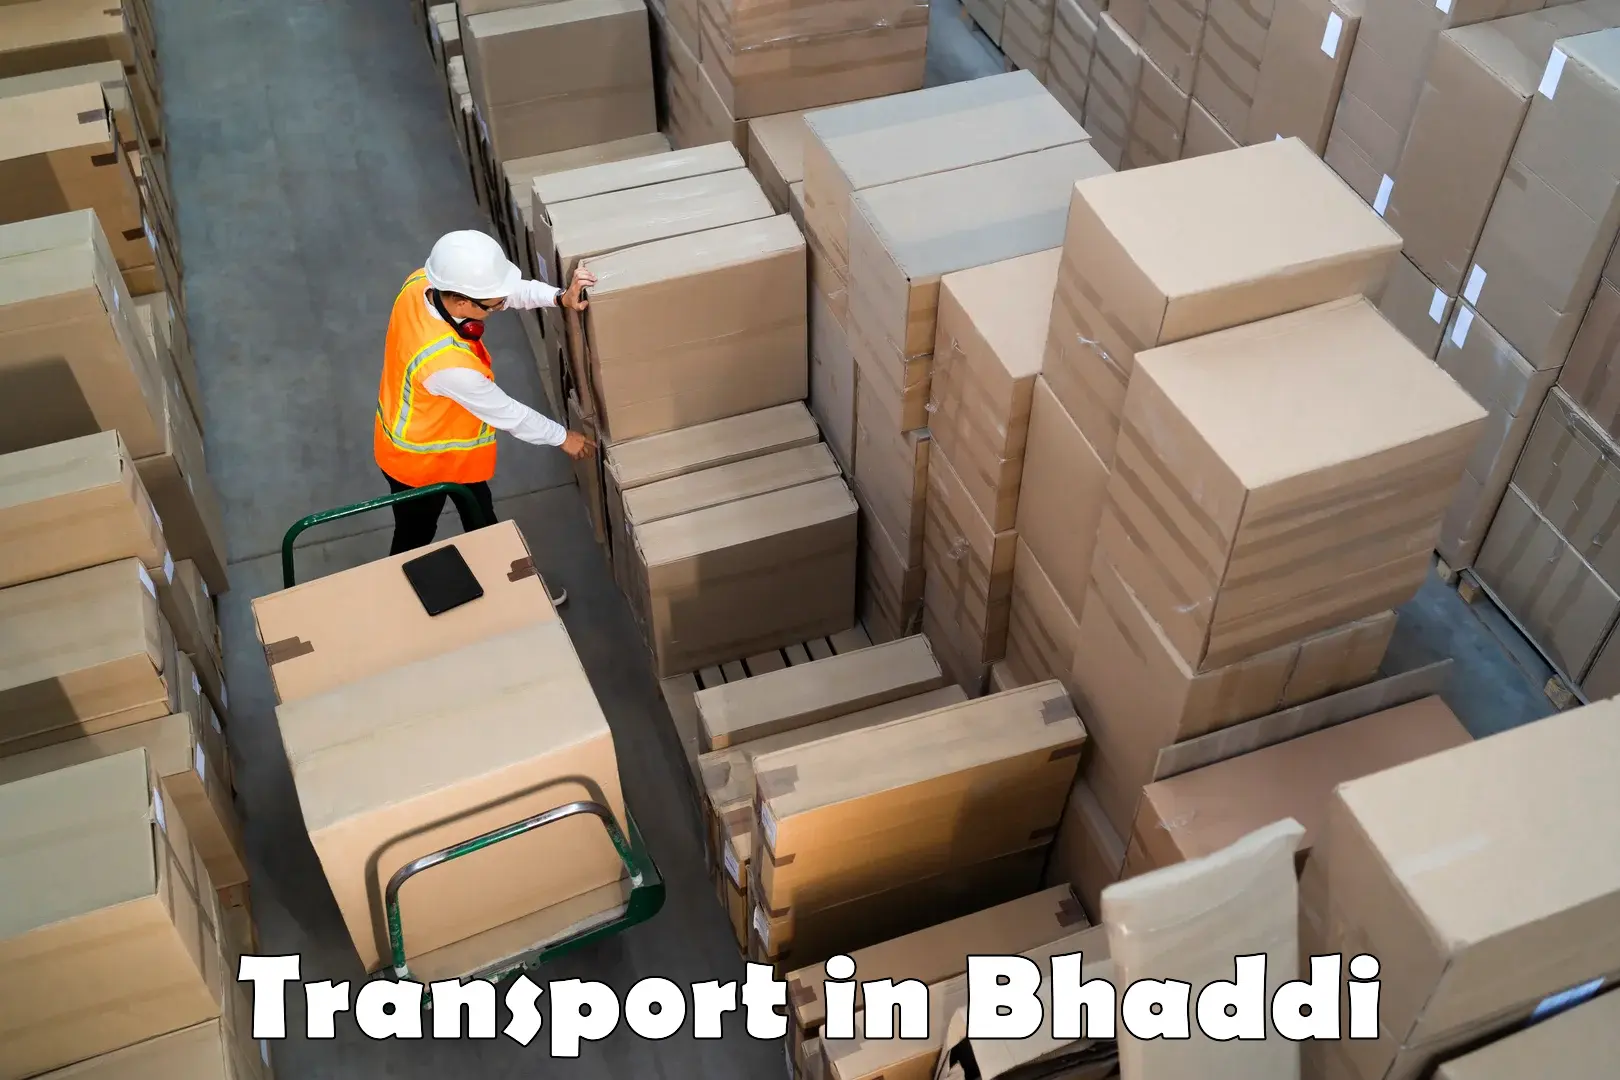 Road transport online services in Bhaddi